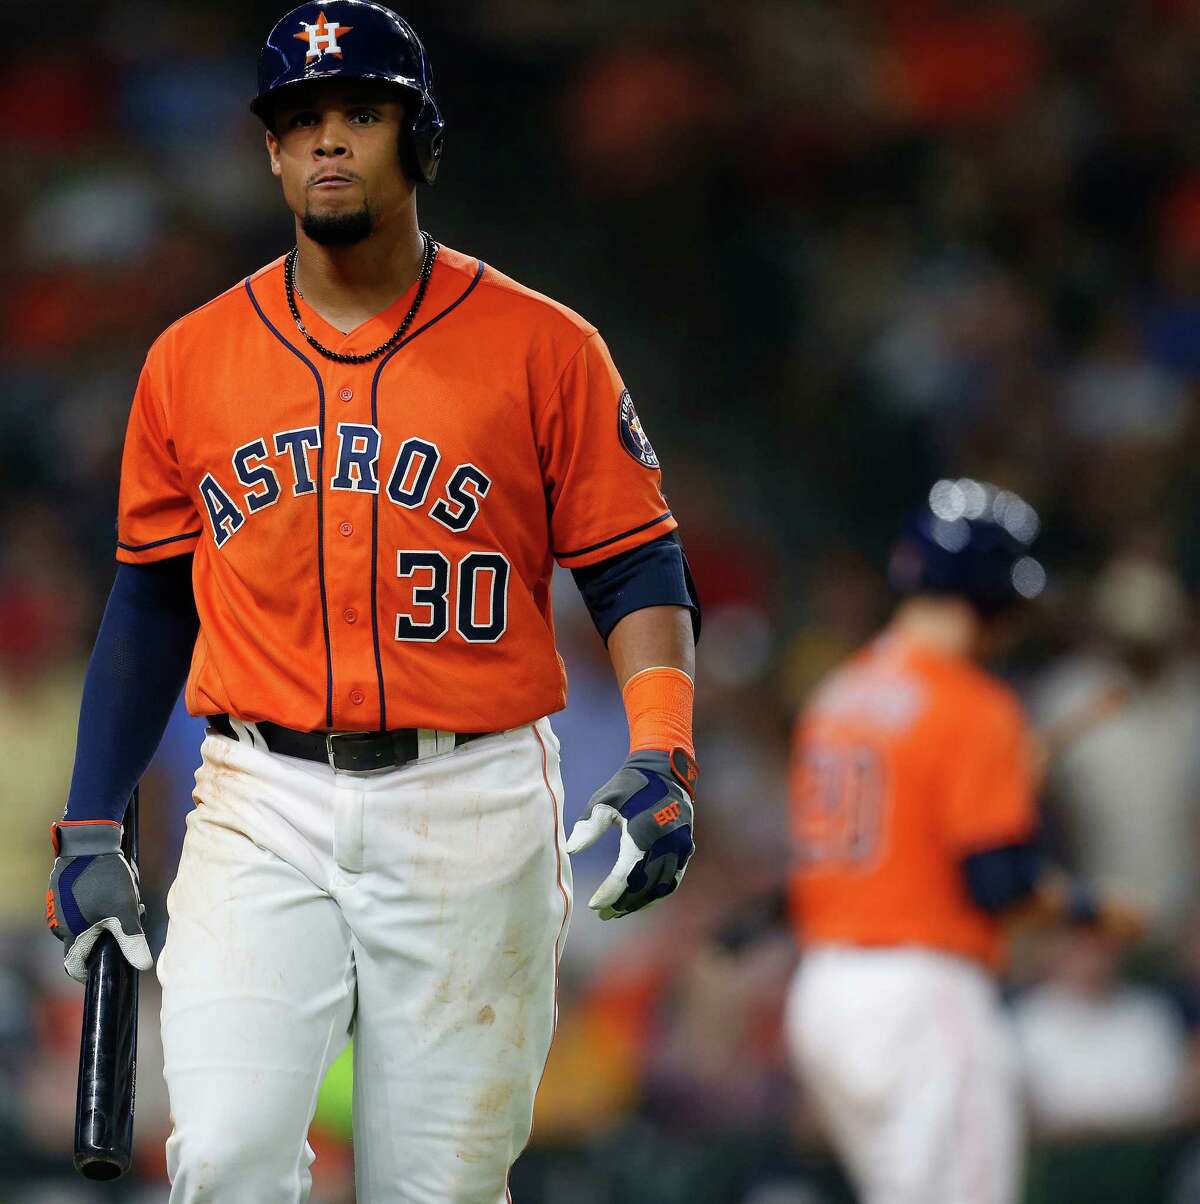 NO. 4 WORST: Carlos Gomez/Mike Fiers, 2015 A day before the July 31 trade deadline, the Astros got Gomez and Fiers from the Brewers for a quartet of minor leaguers: outfielders Domingo Santana and Brett Phillips and pitchers Josh Hader and Adrian Houser. Gomez (pictured), the centerpiece of the deal, was a massive disappointment as an Astro and was released a little more than a year later. Fiers has had his ups and downs - but did throw the first no-hitter at Minute Maid Park in 2015 and has pitched better of late after a rocky start this season.  Of the players the Astros gave up, all but Houser are in Milwaukee, with Santana putting up good numbers for the Brewers, who were among MLB's first-half surprises this season.